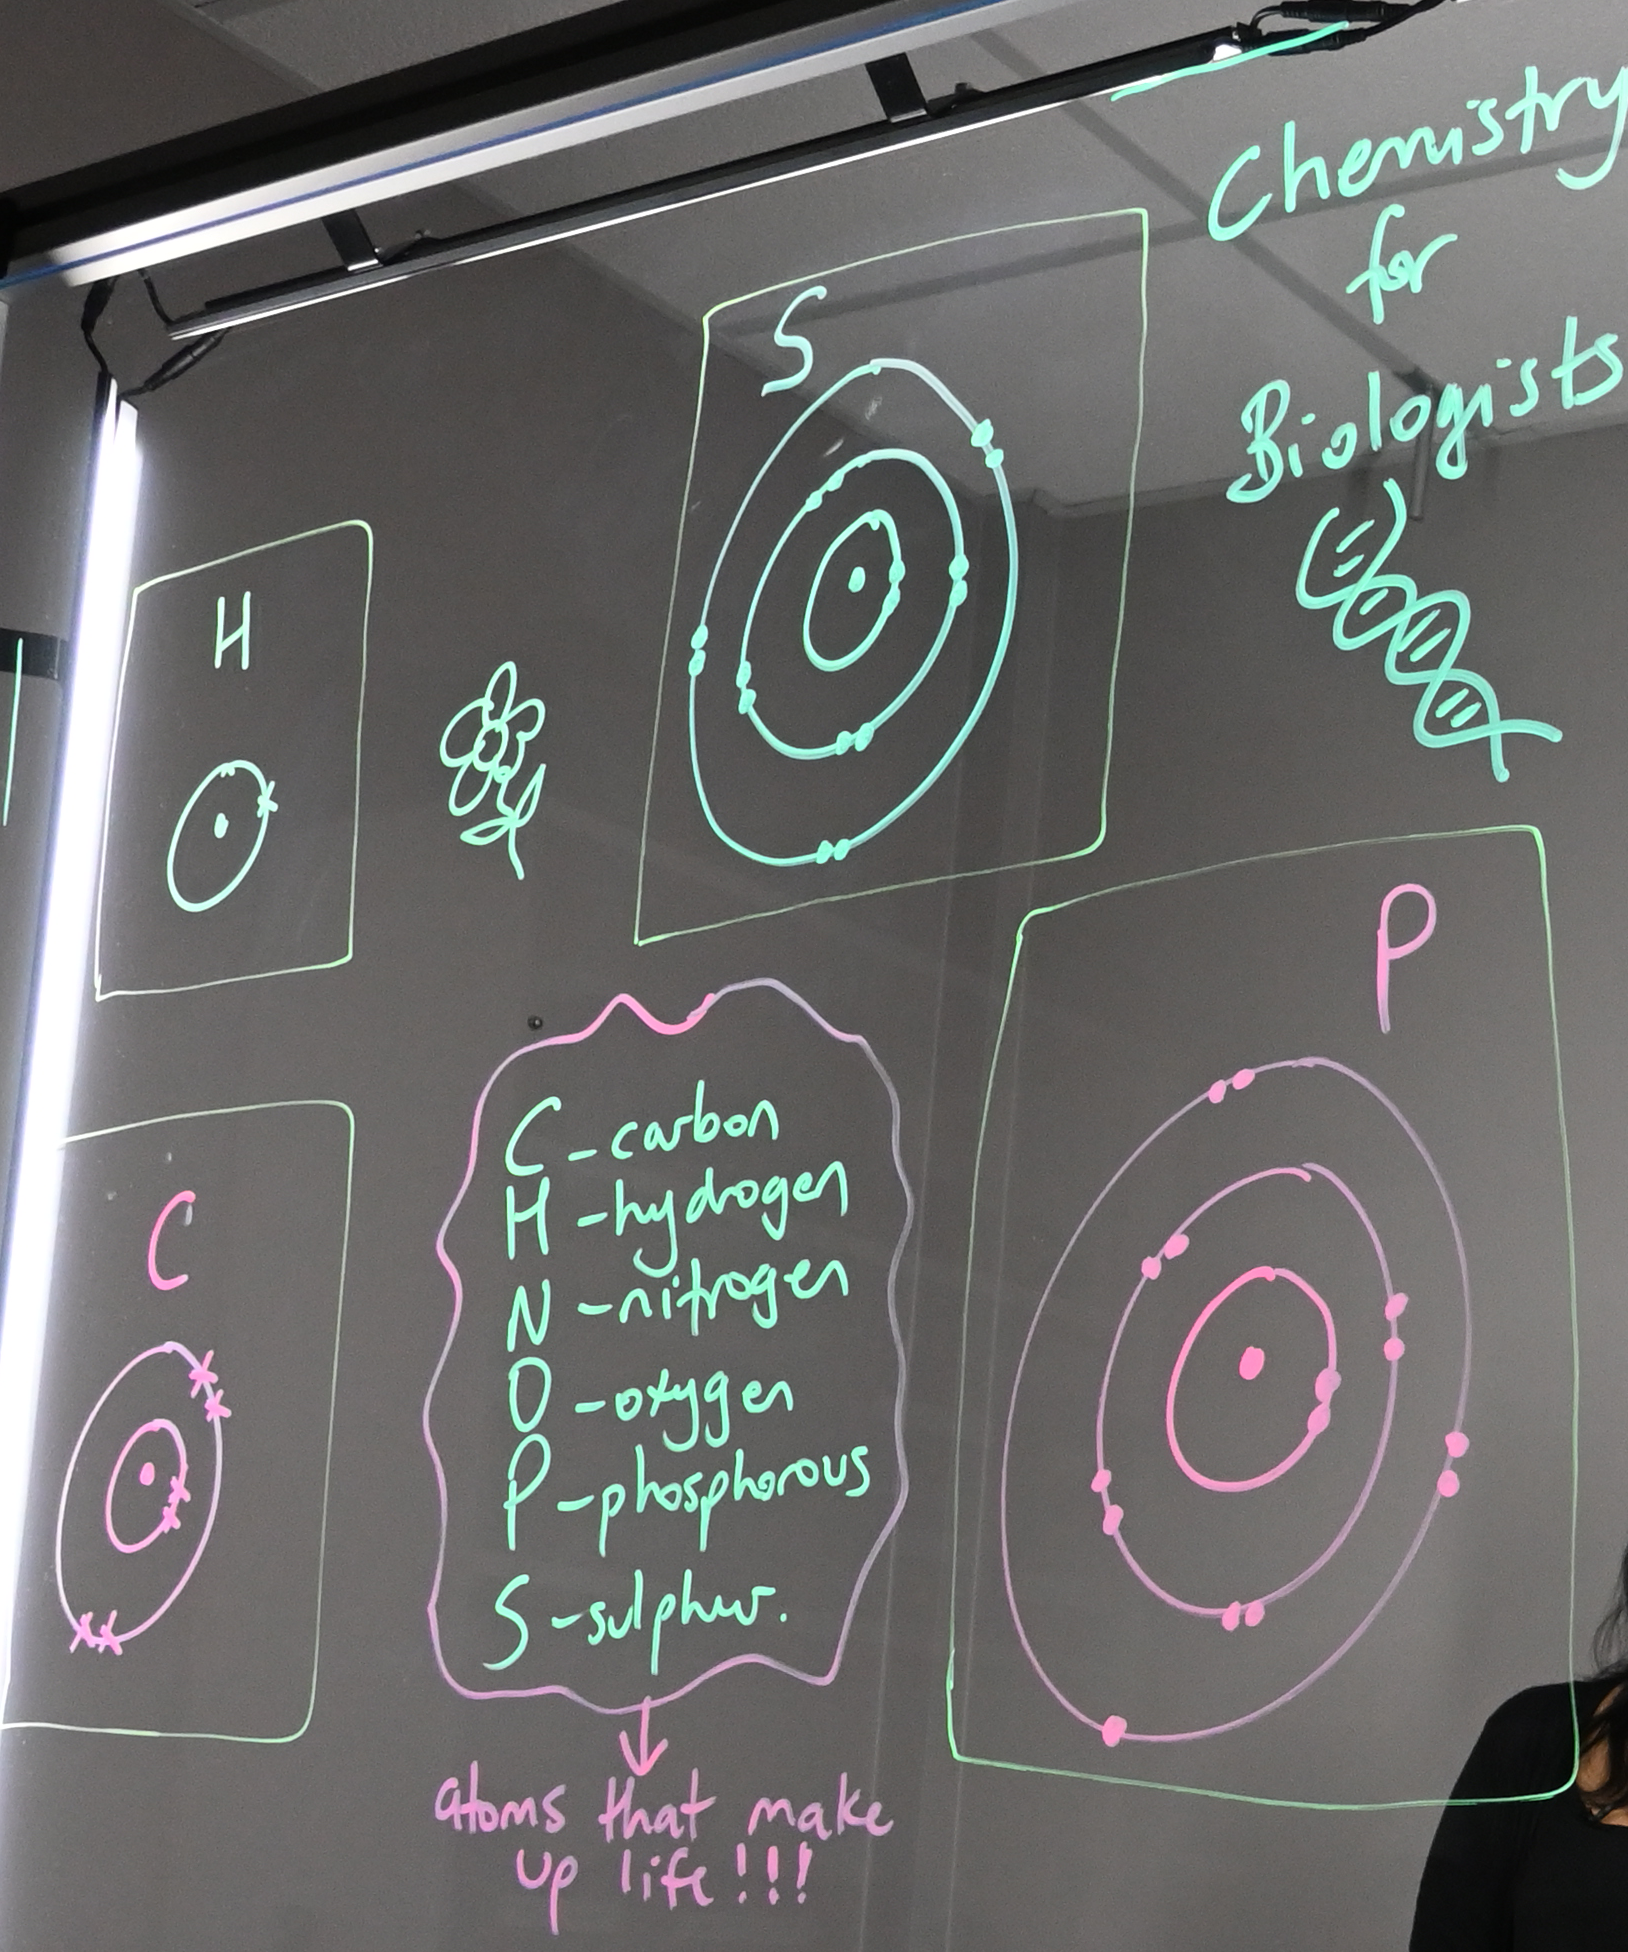 Writing on a light board shows Bohr models of carbon, hydrogen, sulphur, and phosphorus. There is a list of the six elements that make up life: carbon, hydrogen, nitrogen, oxygen, phosphorus, and sulphur.